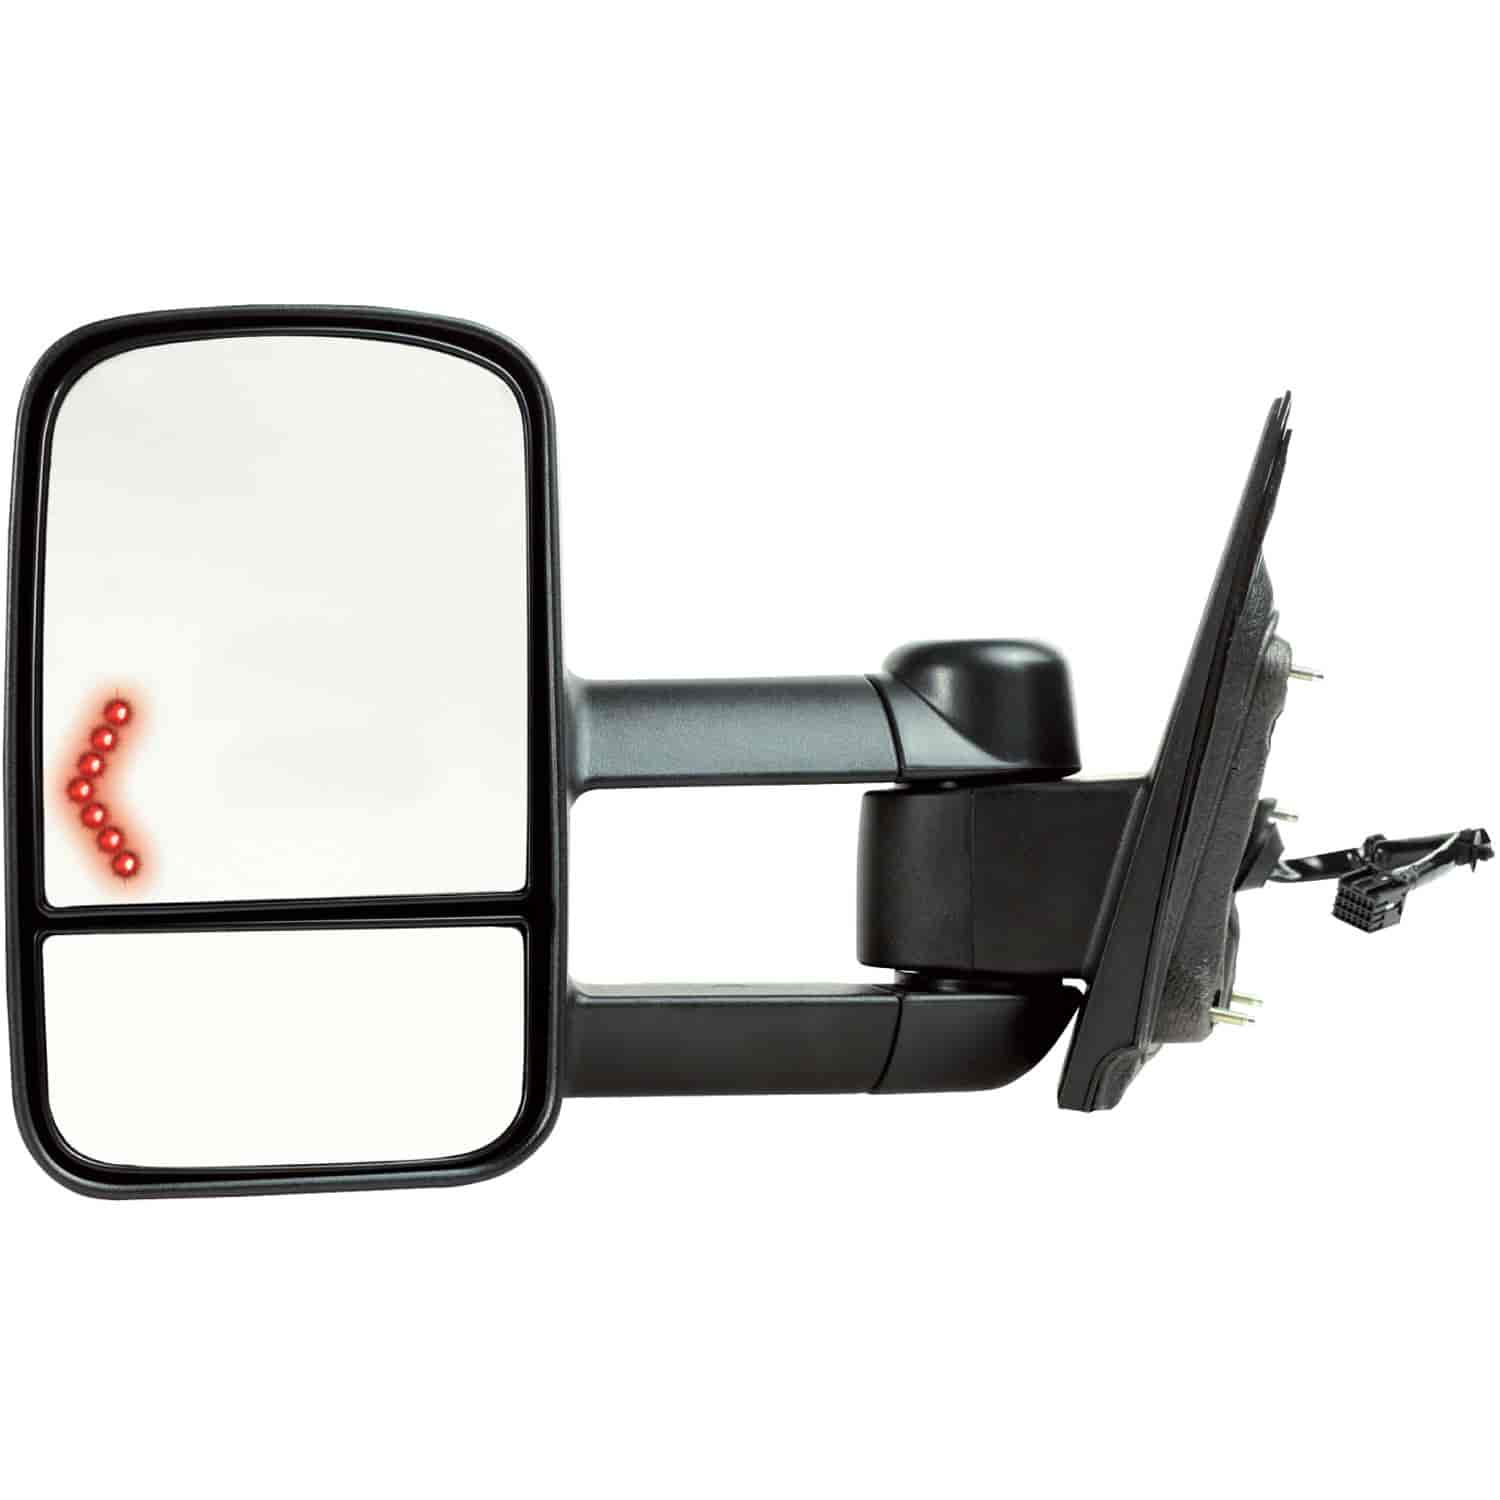 OEM Style Replacement mirror for 2014 Chevrolet Silverado Pick-Up 1500/ GMC Sierra Pick-Up 1500 exte